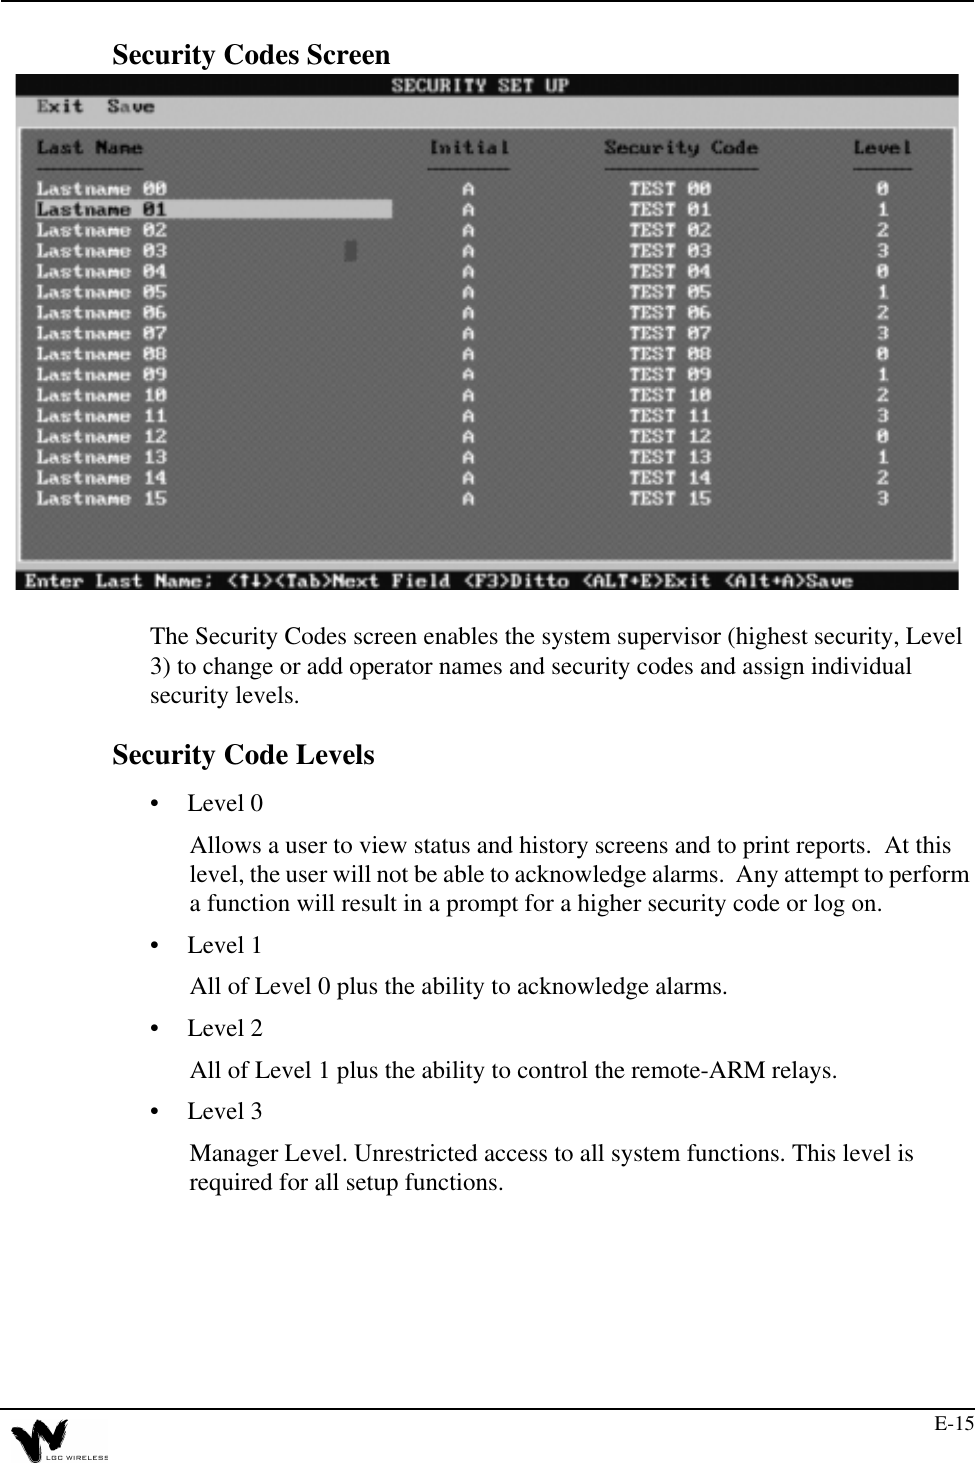 E-15Security Codes ScreenThe Security Codes screen enables the system supervisor (highest security, Level 3) to change or add operator names and security codes and assign individual security levels.Security Code Levels•Level 0Allows a user to view status and history screens and to print reports.  At this level, the user will not be able to acknowledge alarms.  Any attempt to perform a function will result in a prompt for a higher security code or log on.•Level 1All of Level 0 plus the ability to acknowledge alarms.•Level 2All of Level 1 plus the ability to control the remote-ARM relays.•Level 3Manager Level. Unrestricted access to all system functions. This level is required for all setup functions.